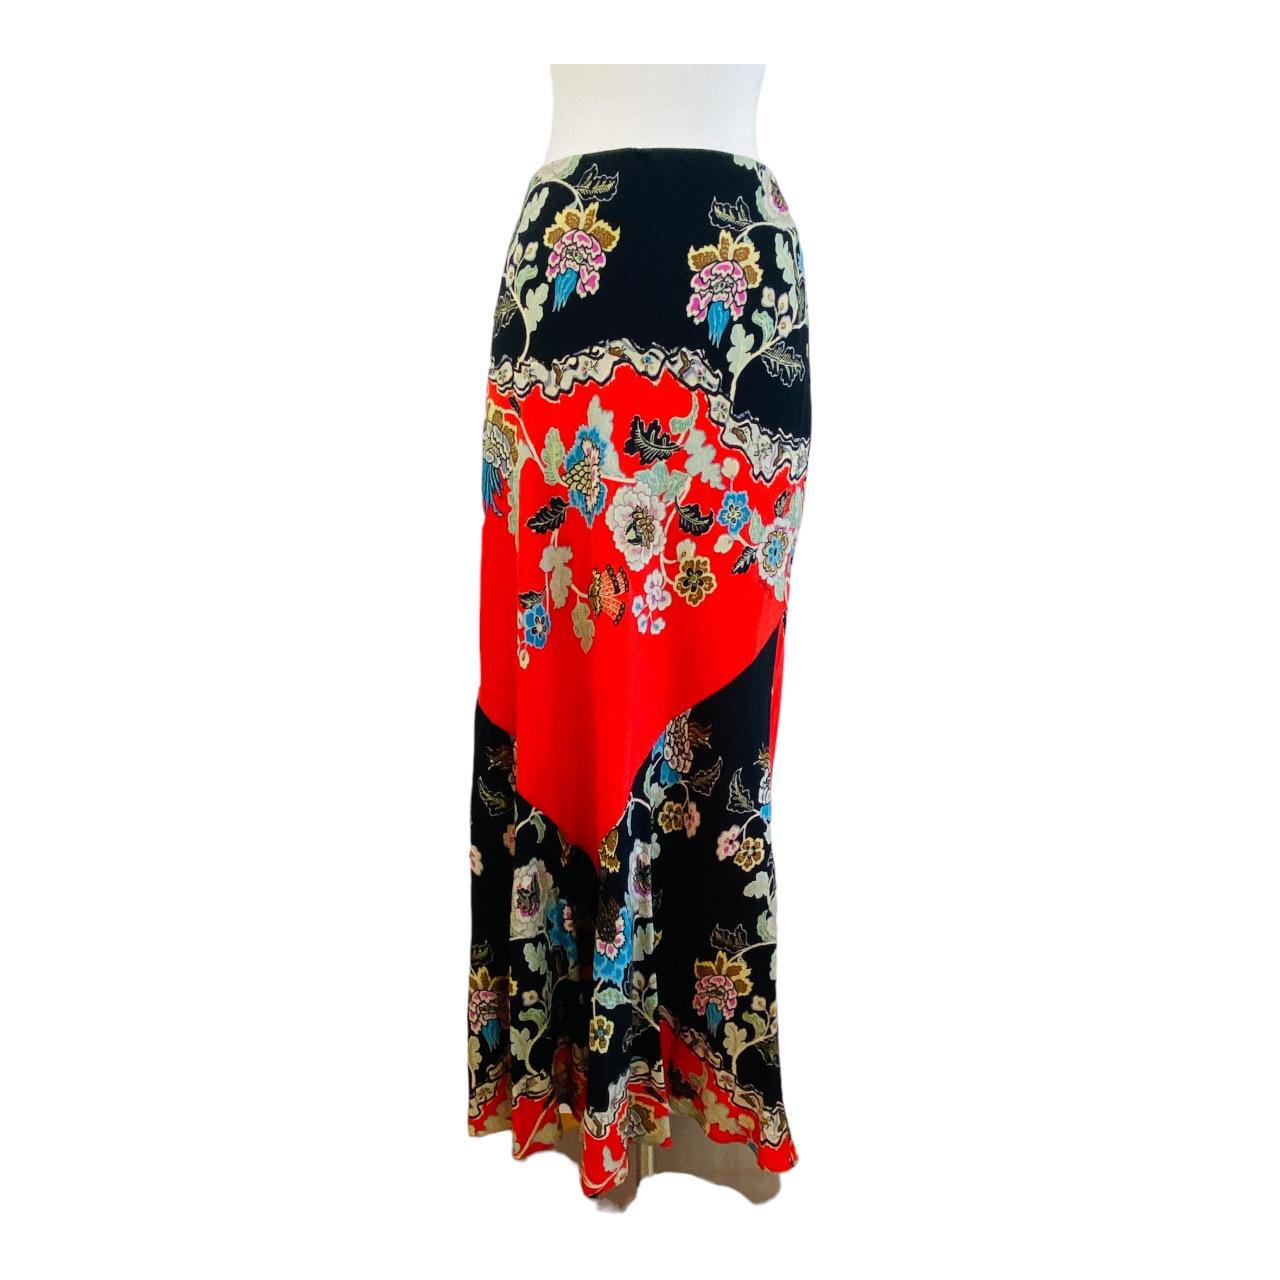 Women's or Men's Vintage Roberto Cavalli S/S 2003 Chinoiserie Black + Red Floral Maxi Skirt For Sale